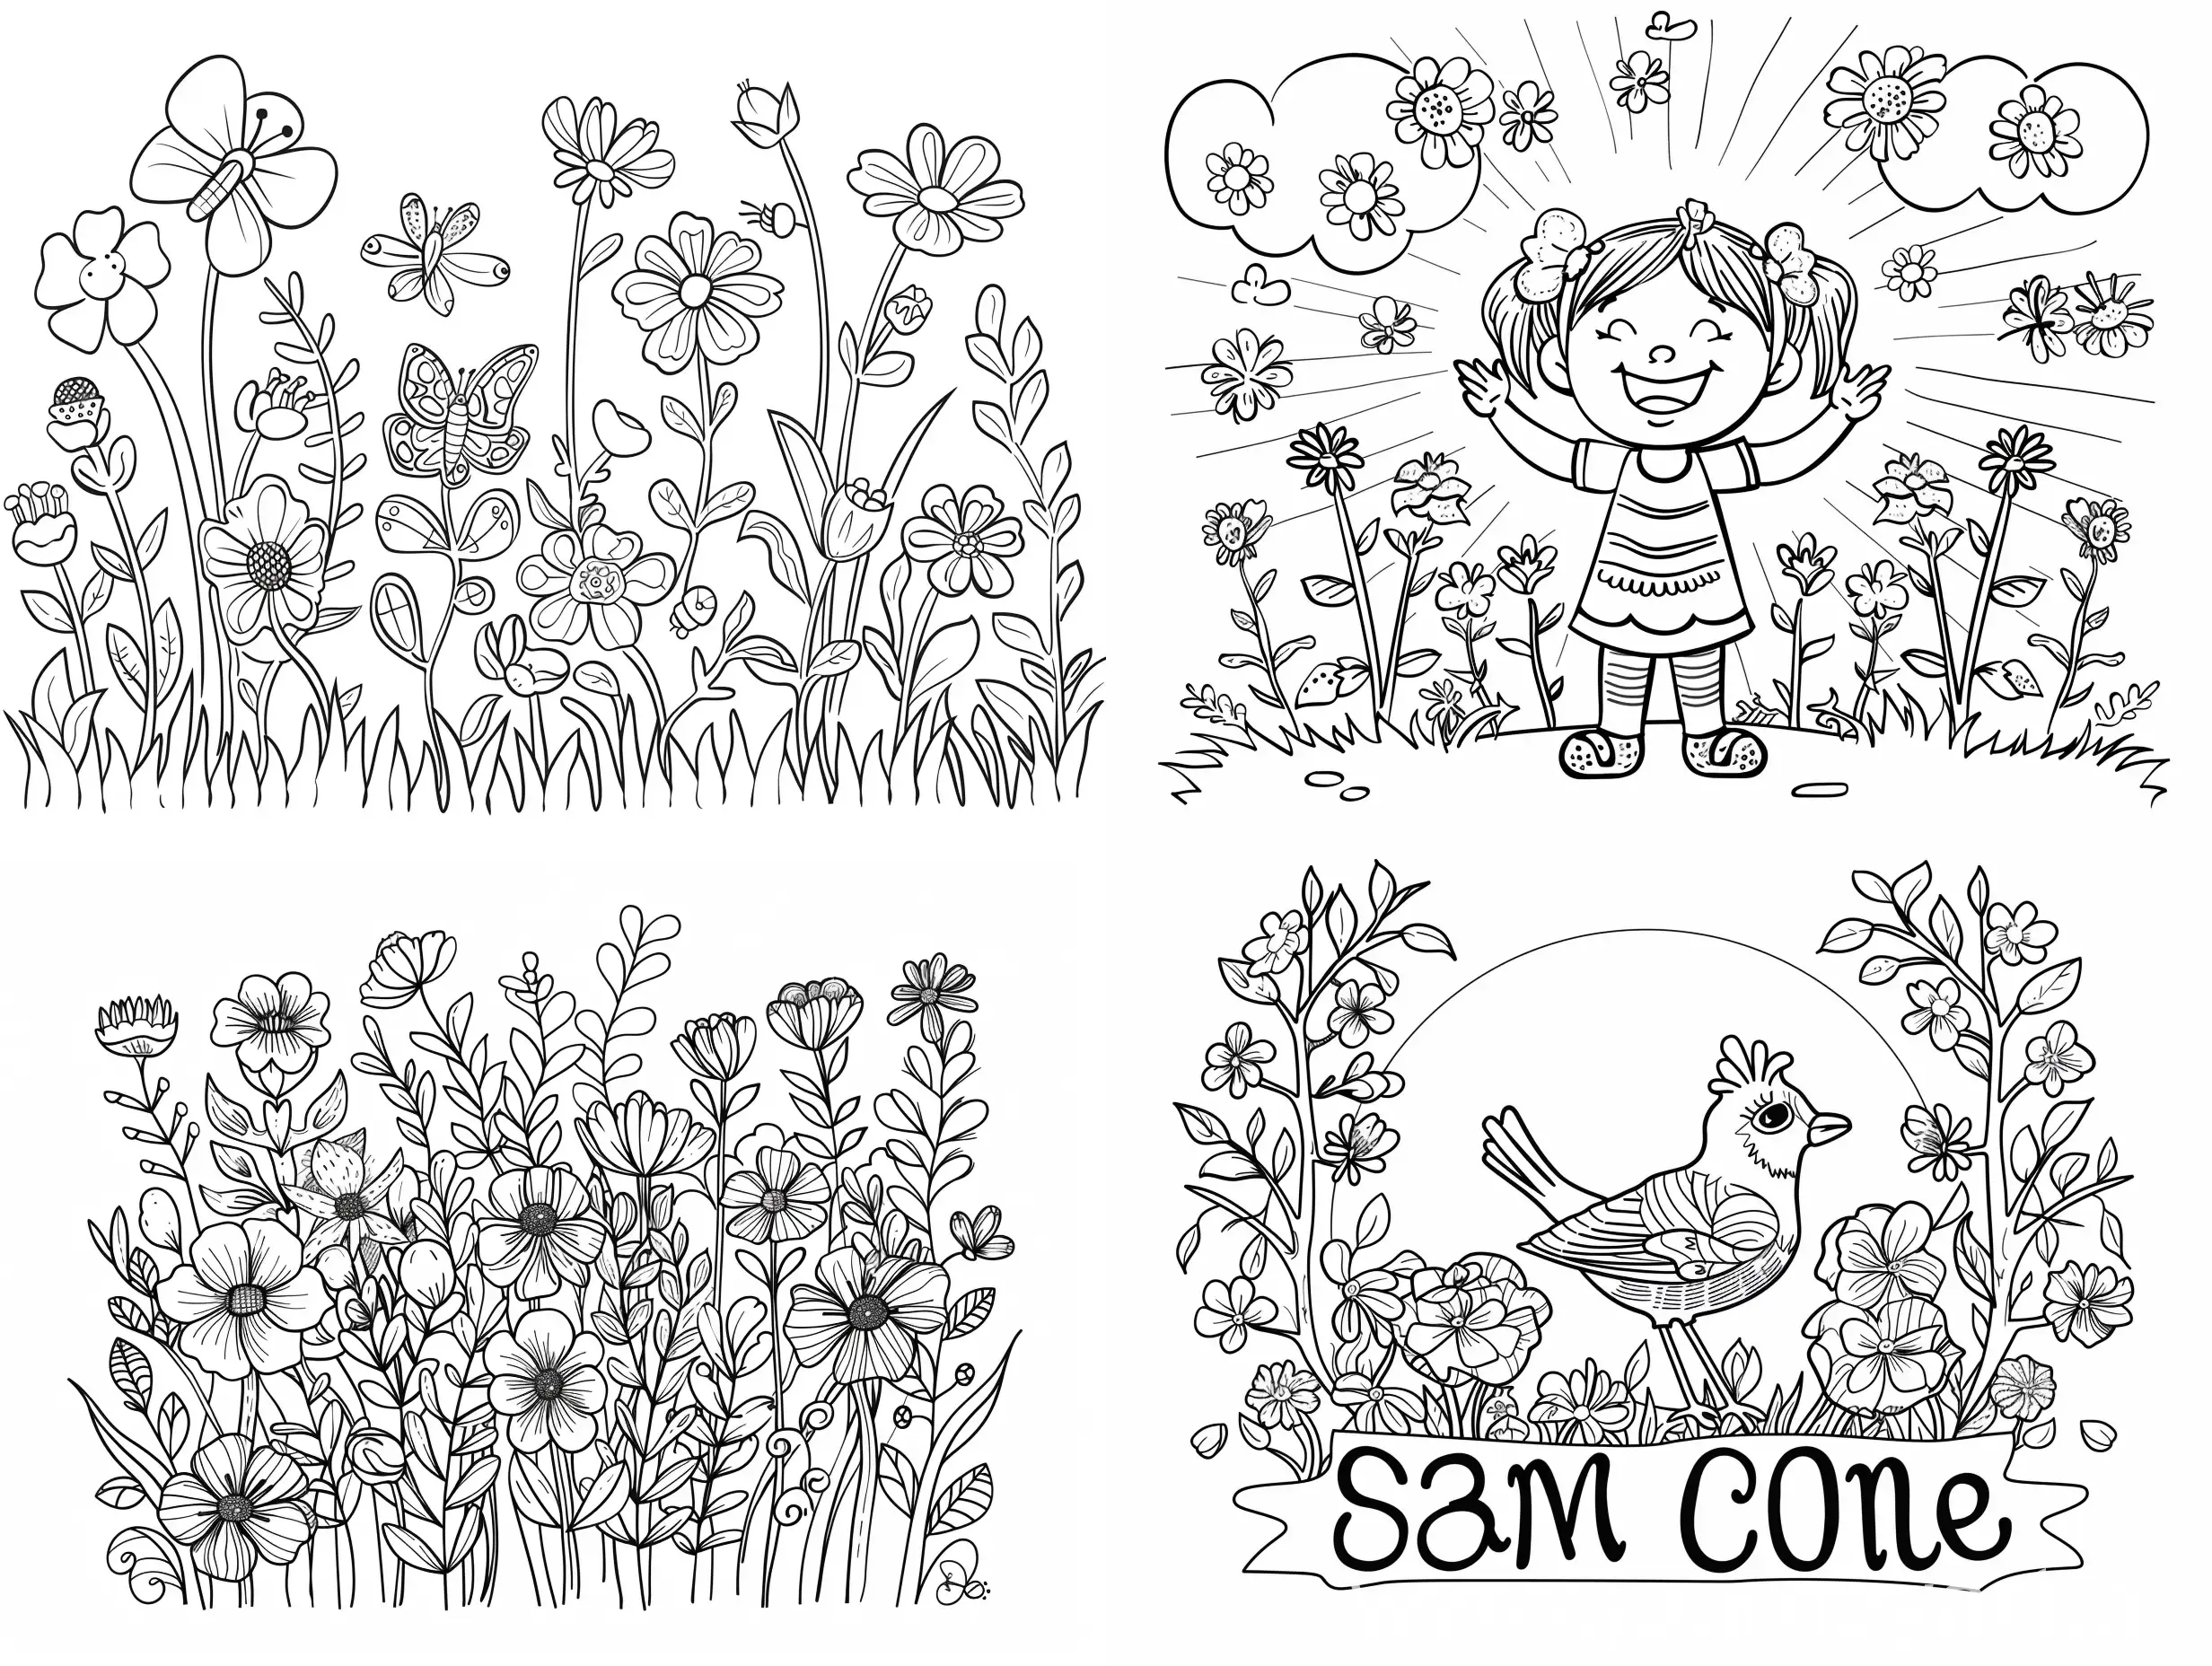 coloring page for kids,low detailed, simply cartoon style, isolated, funny, spring is coming